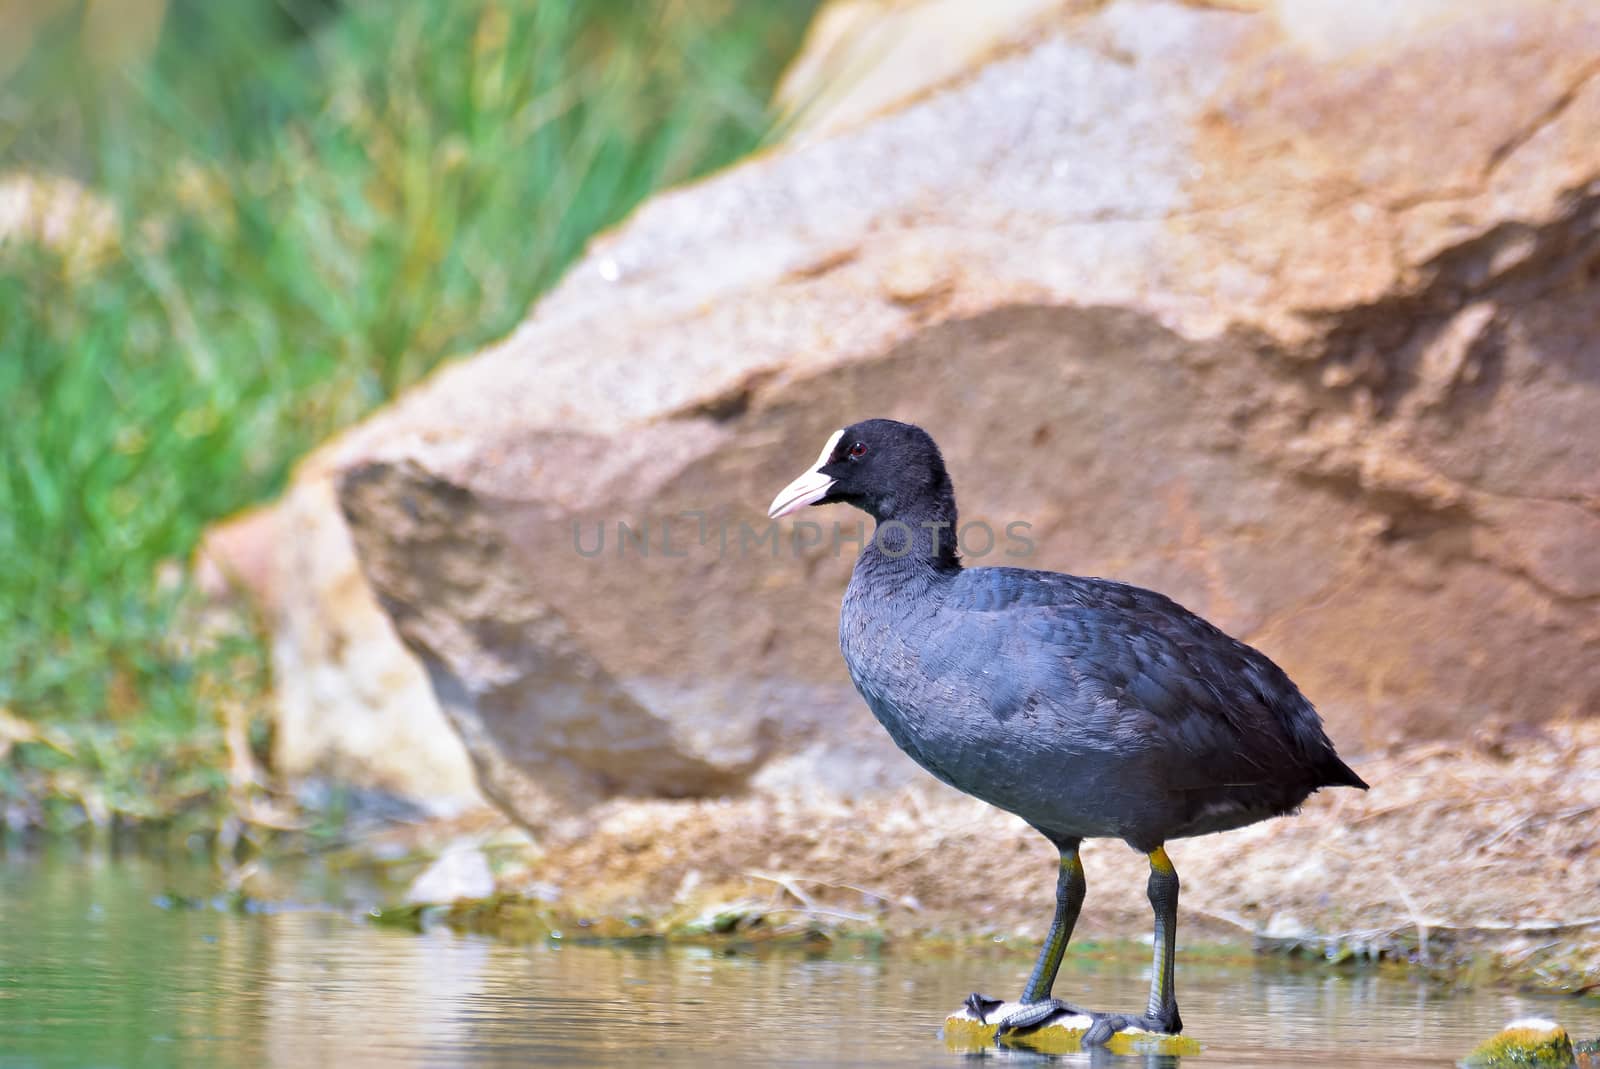 Eurasian coot standing on a solid rock by rkbalaji